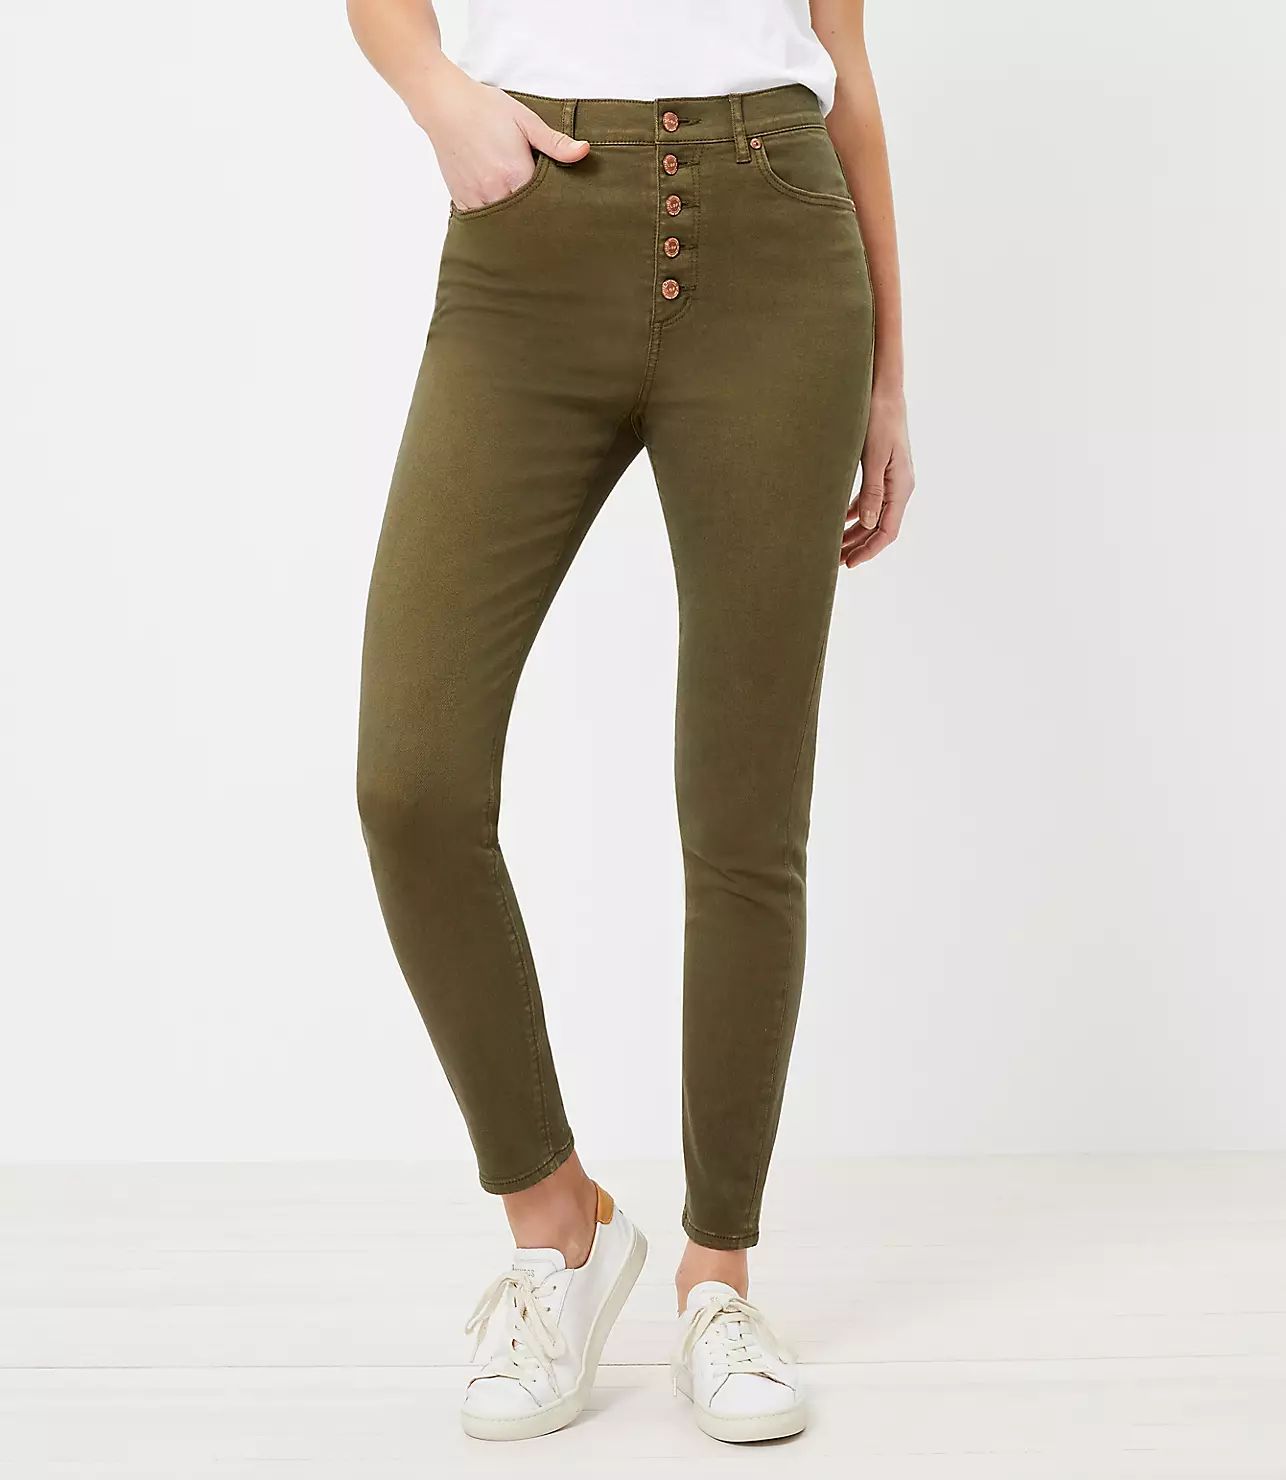 The High Waist Button Front Skinny Jean in Vintage Olive | LOFT